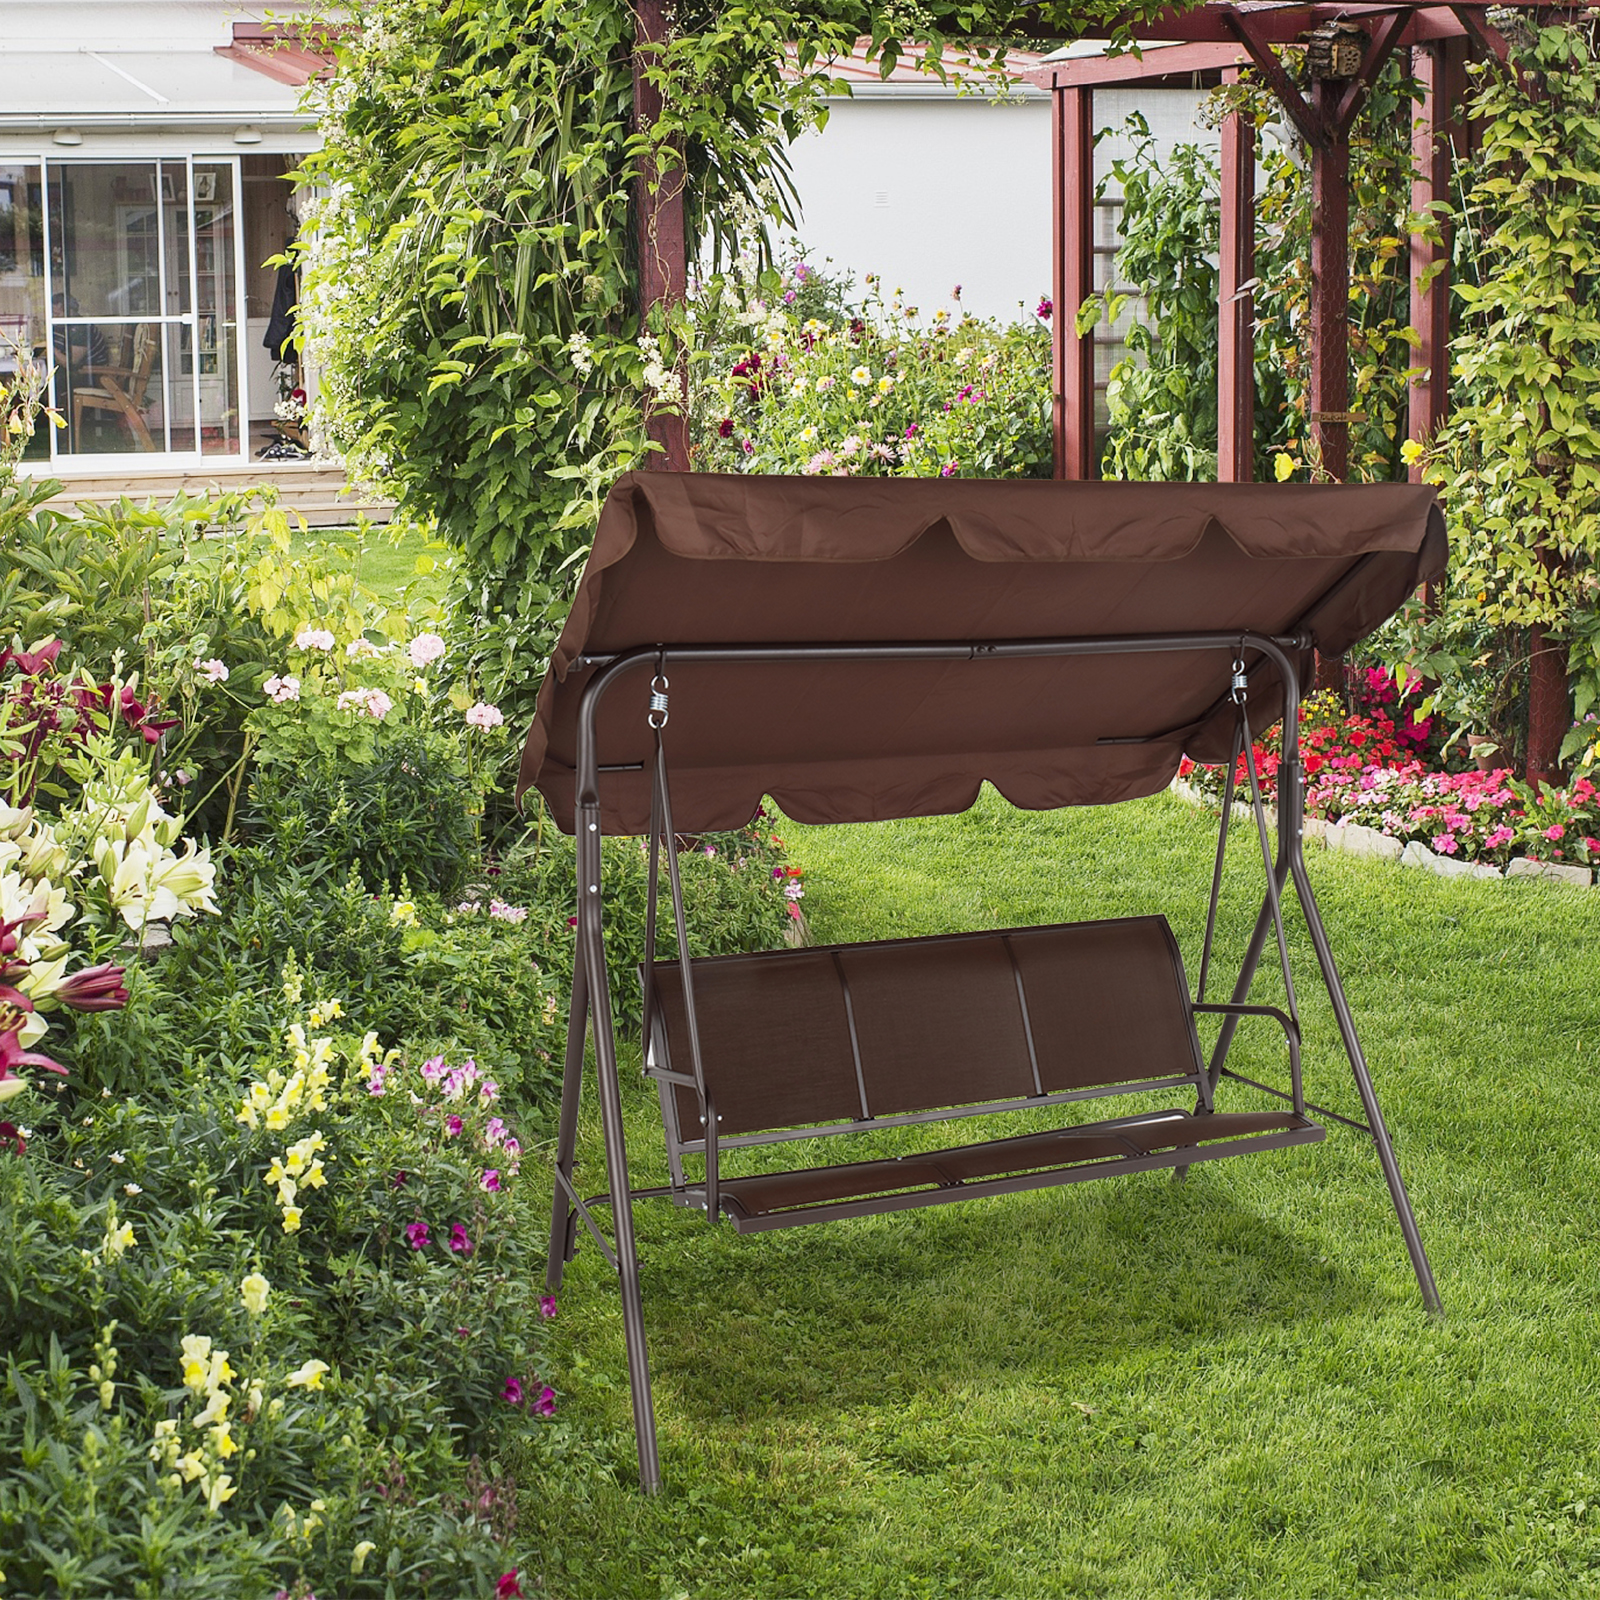 Goorabbit Swing Chair,Outdoor Hanging Bench,Swing Chair With Canopy Teslin Cushion 550lbs Load-Bearing Iron,66.93x 59.84x 26.35",Brown - image 5 of 14